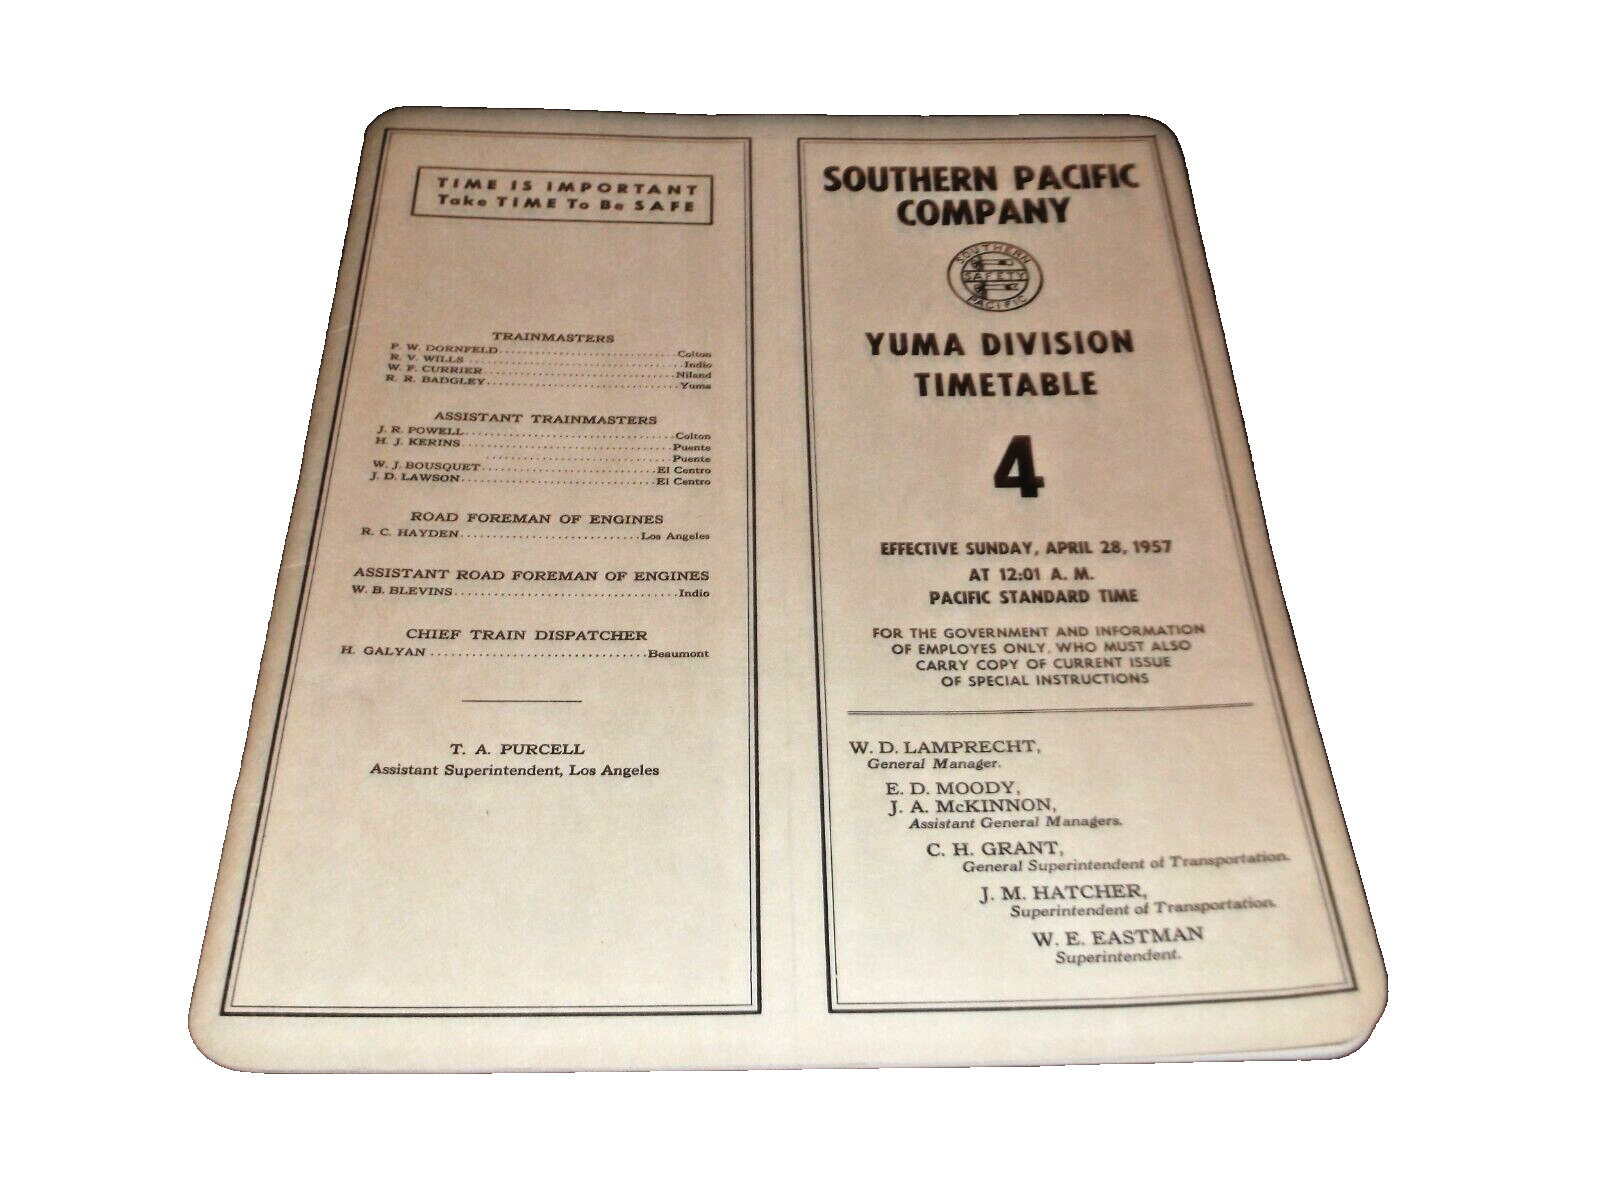 APRIL 1957 SOUTHERN PACIFIC YUMA DIVISION EMPLOYEE TIMETABLE #4